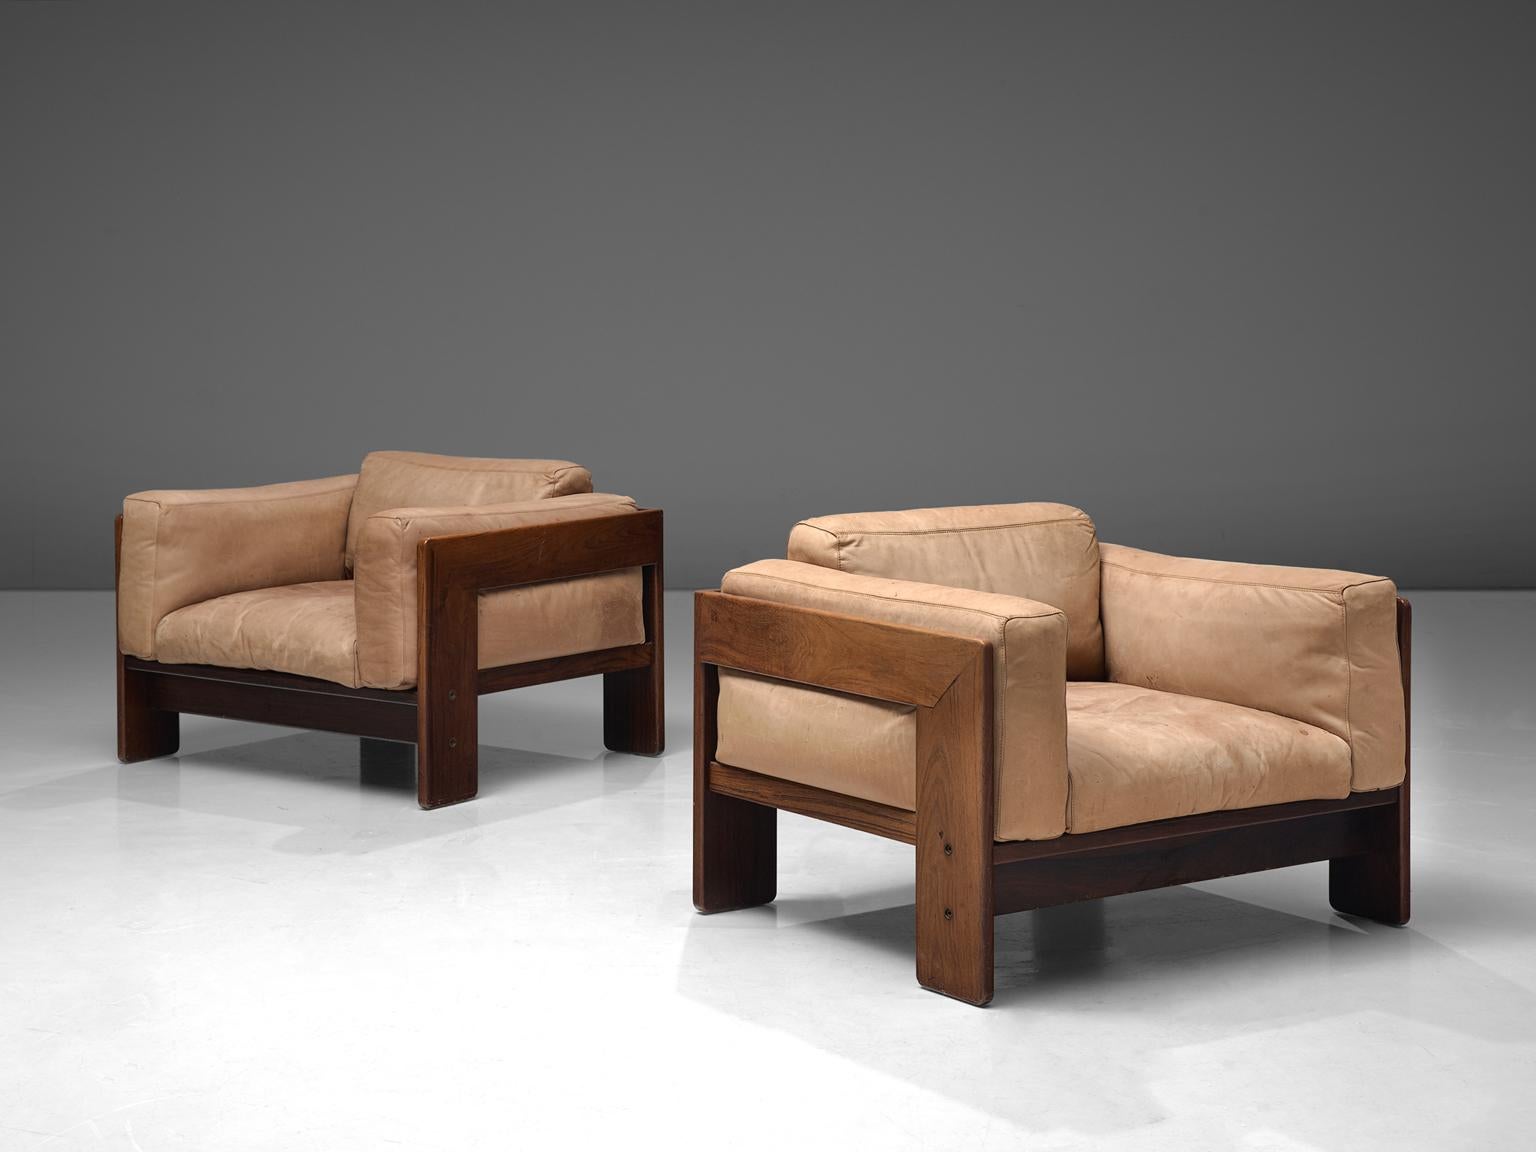 Tobia Scarpa for Knoll, pair of 'Bastiano' club chairs, leather and rosewood, Italy, design 1960.
Beautiful pair of Bastiano club chairs made with a rosewood frame and taupe or natural colored leather cushions. Tobia Scarpa designed the Bastiano